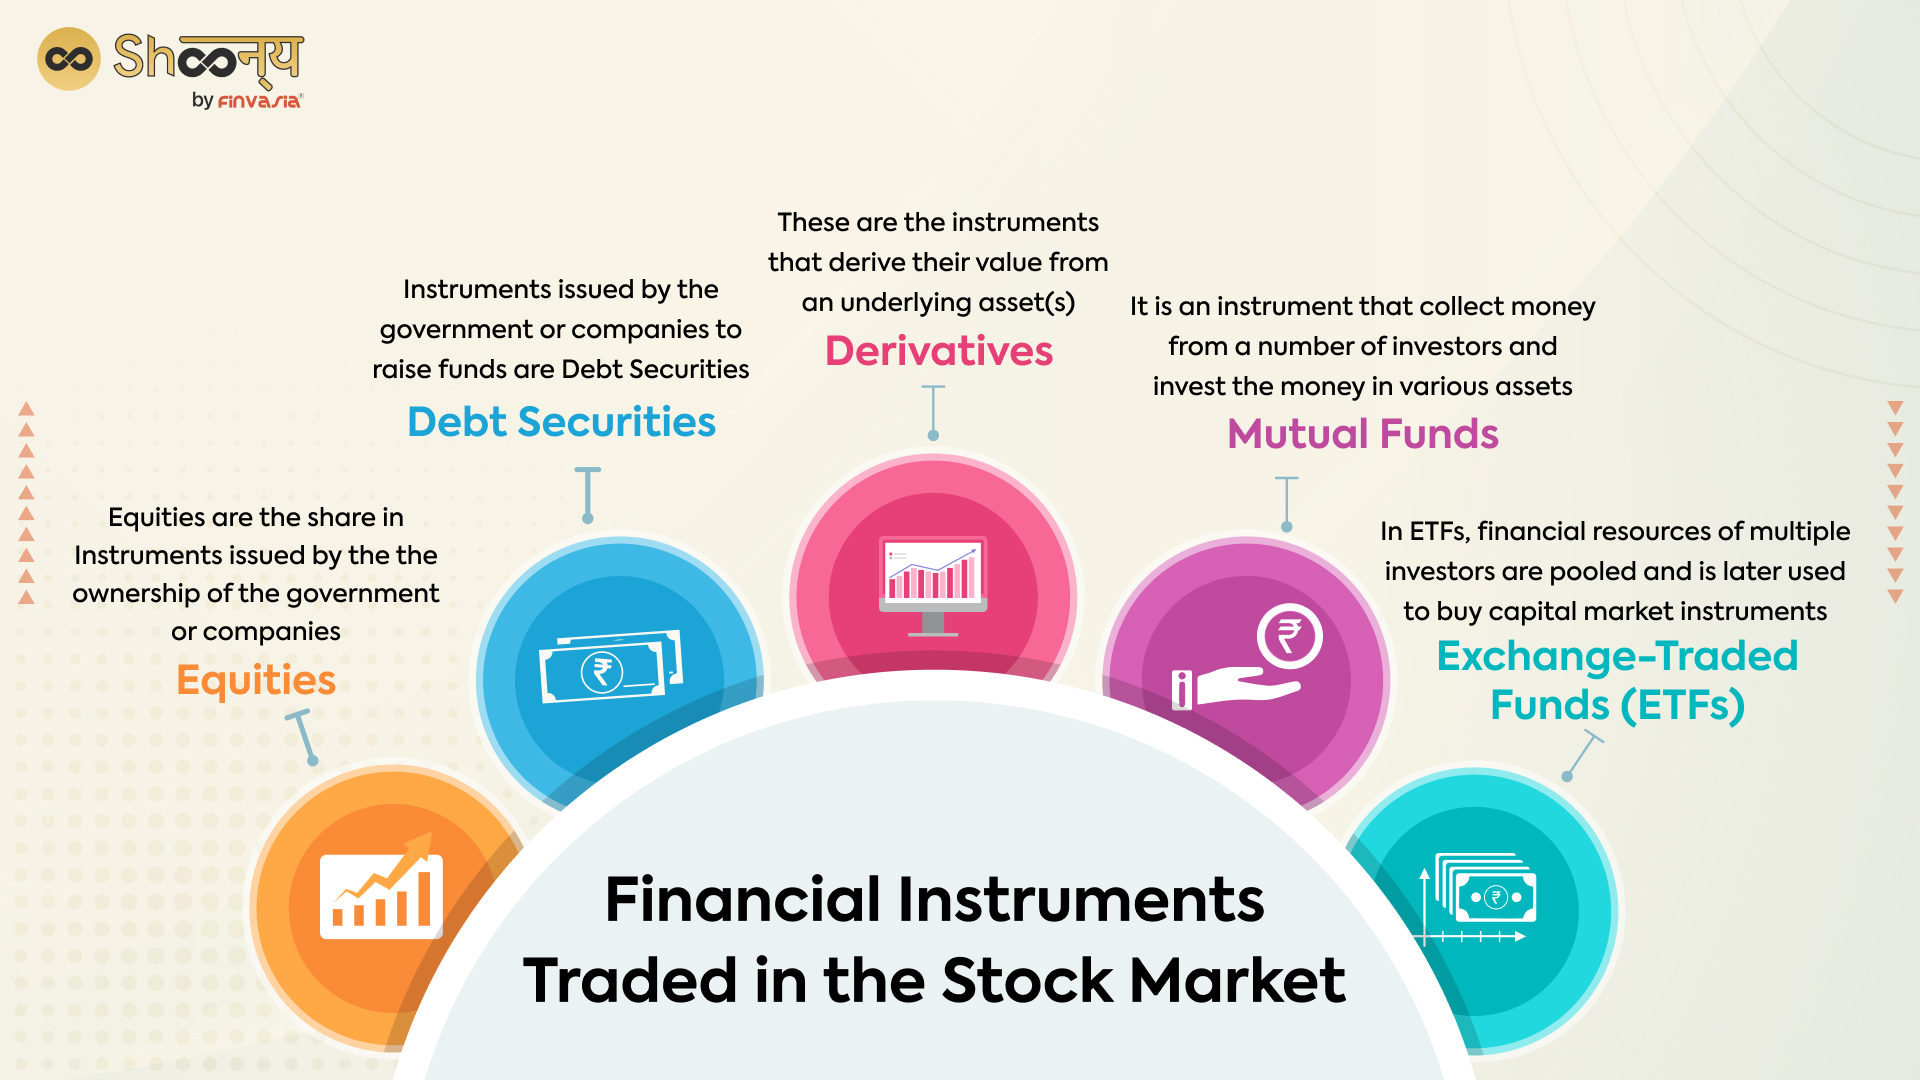 Financial instruments traded in the stock market